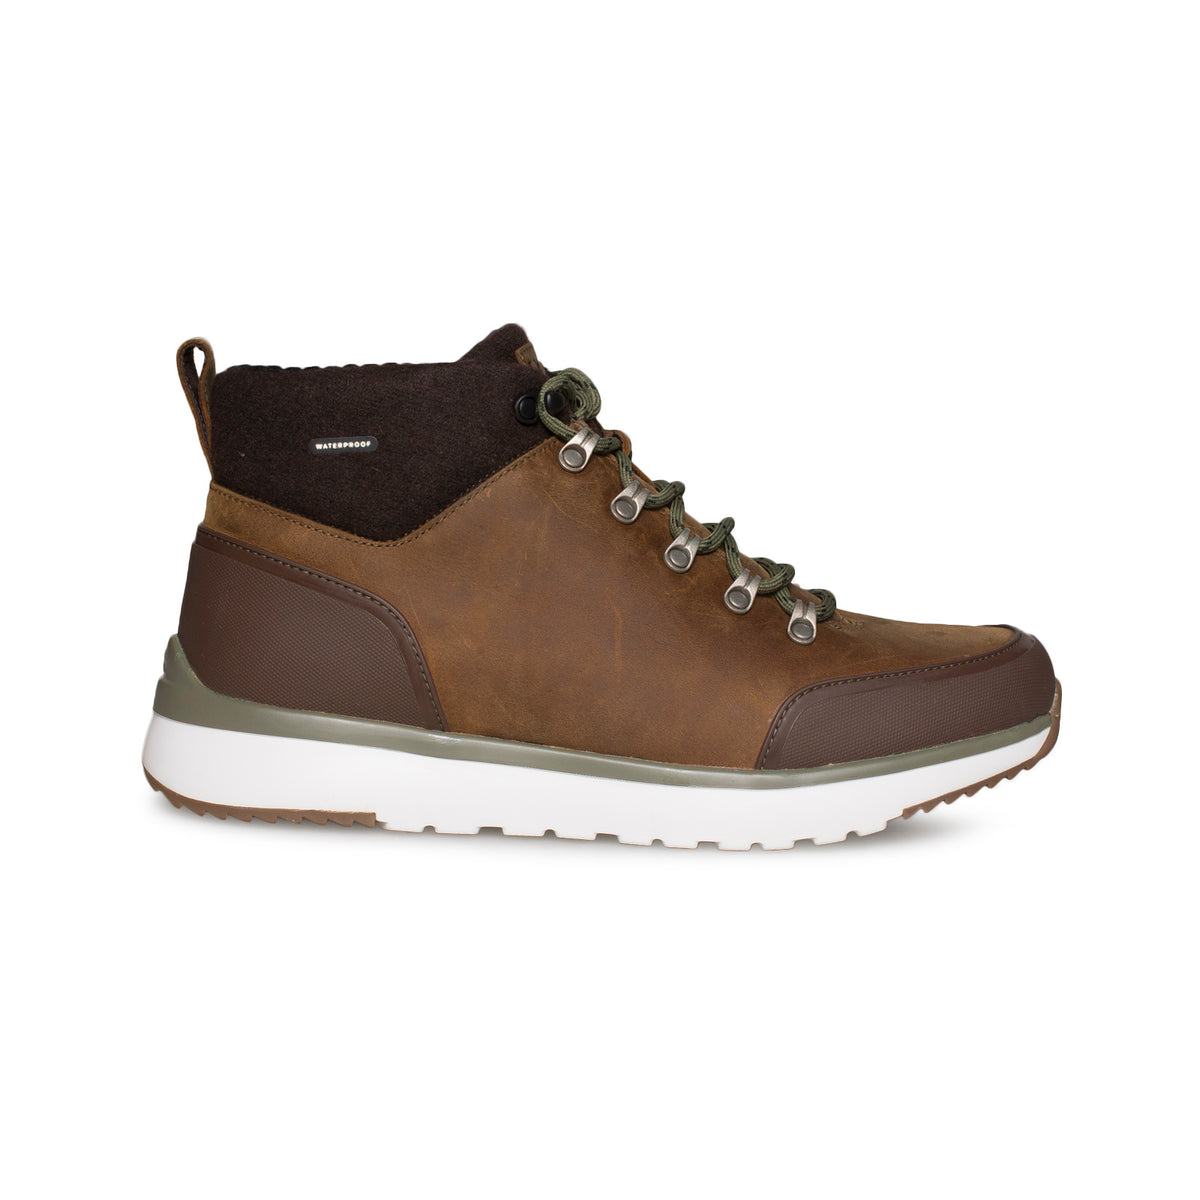 ugg mens olivert boots grizzly